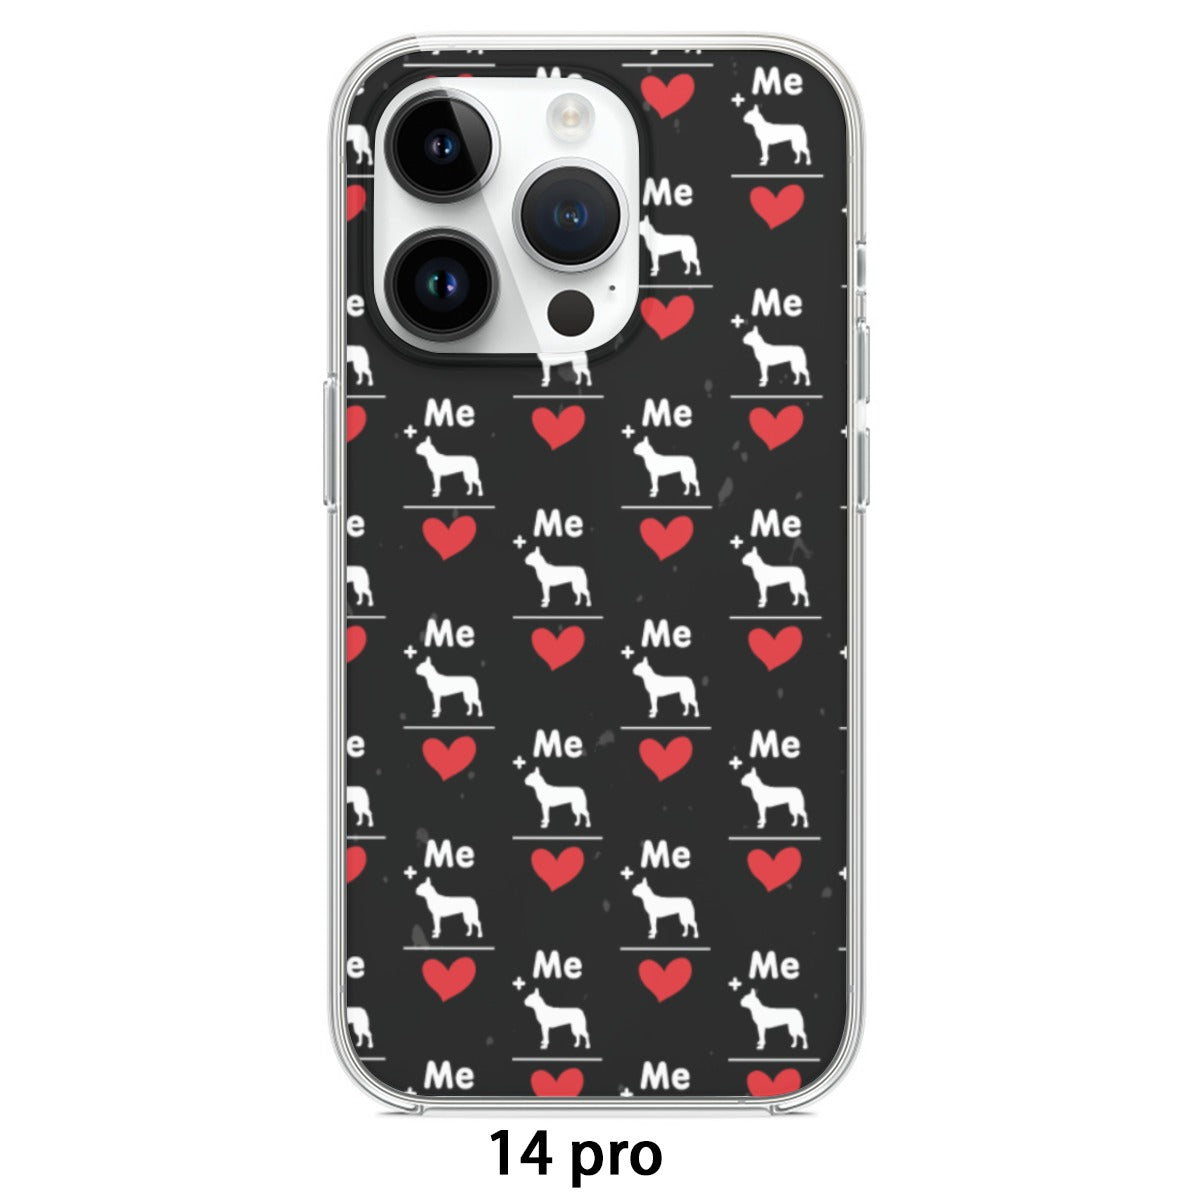 Rocco - iPhone case for Boston Terrier lovers